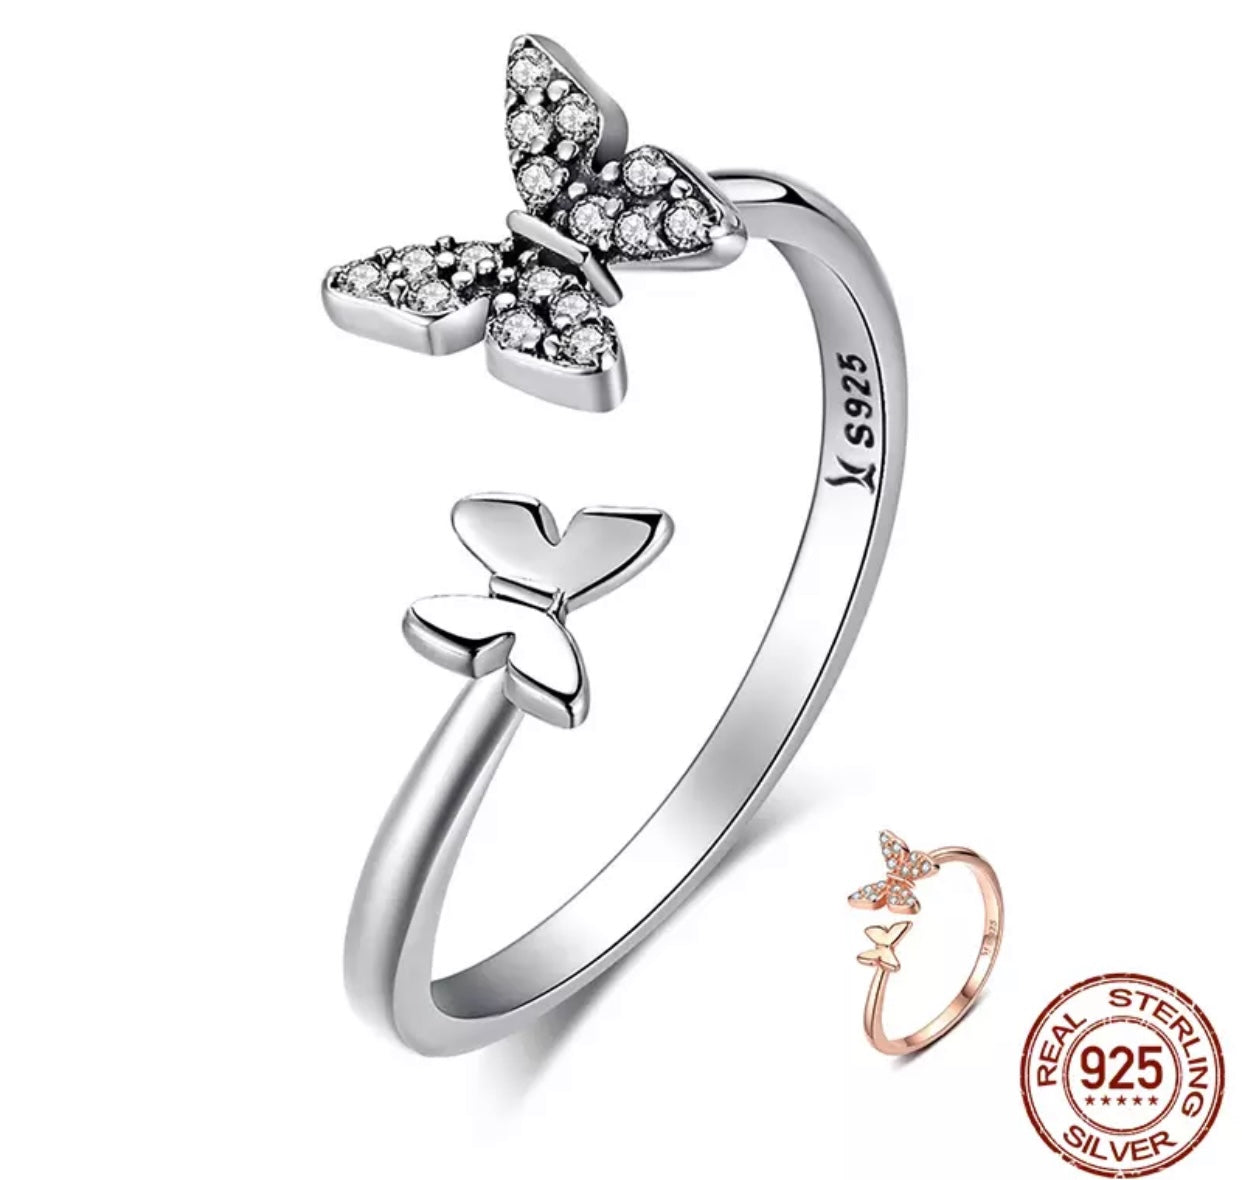 PALOMA STERLING SILVER OPEN SETTING BUTTERFLY RING